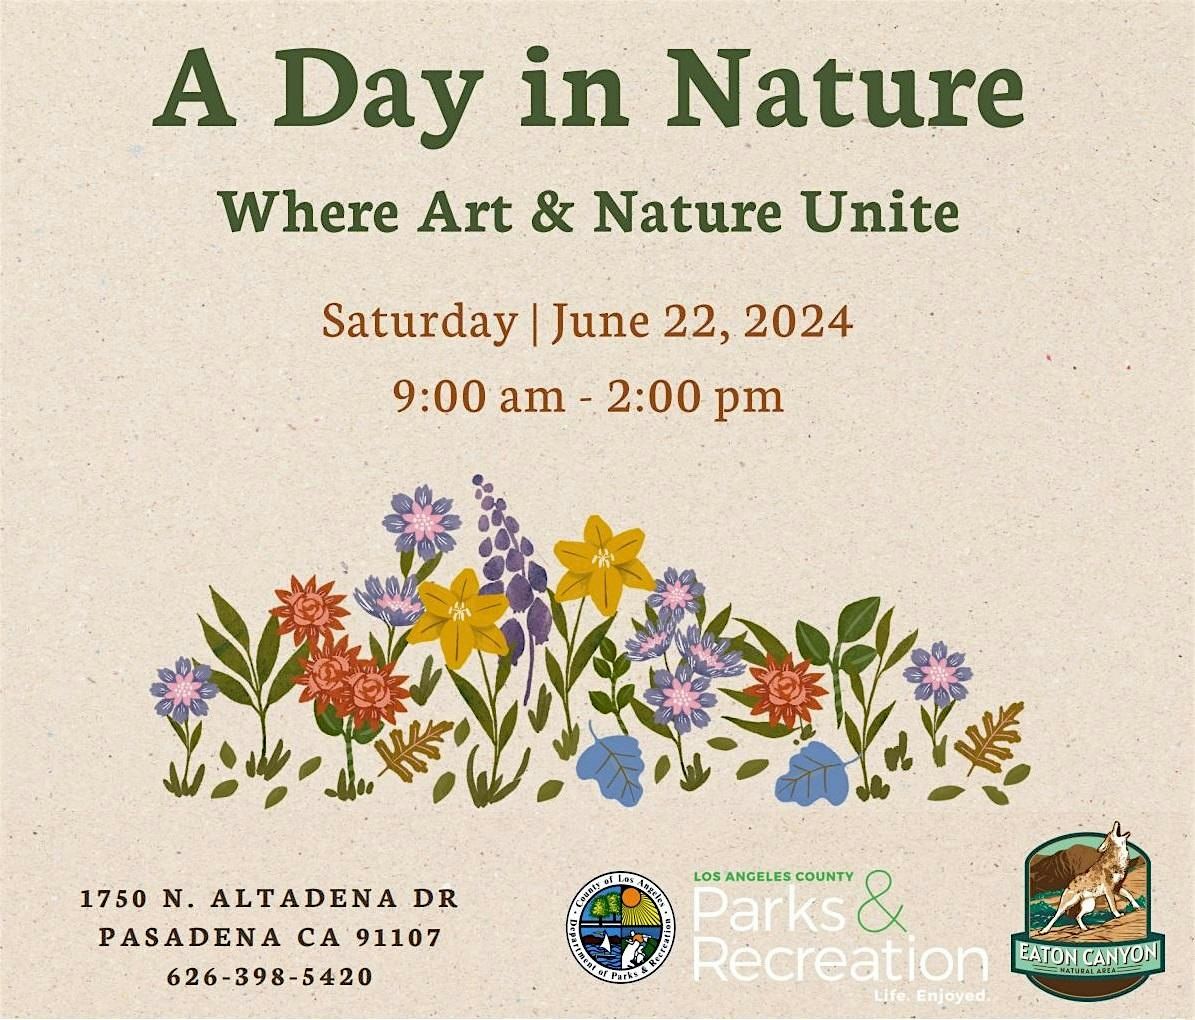 Save the Date: A Day in Nature at Eaton Canyon (no rsvp required)